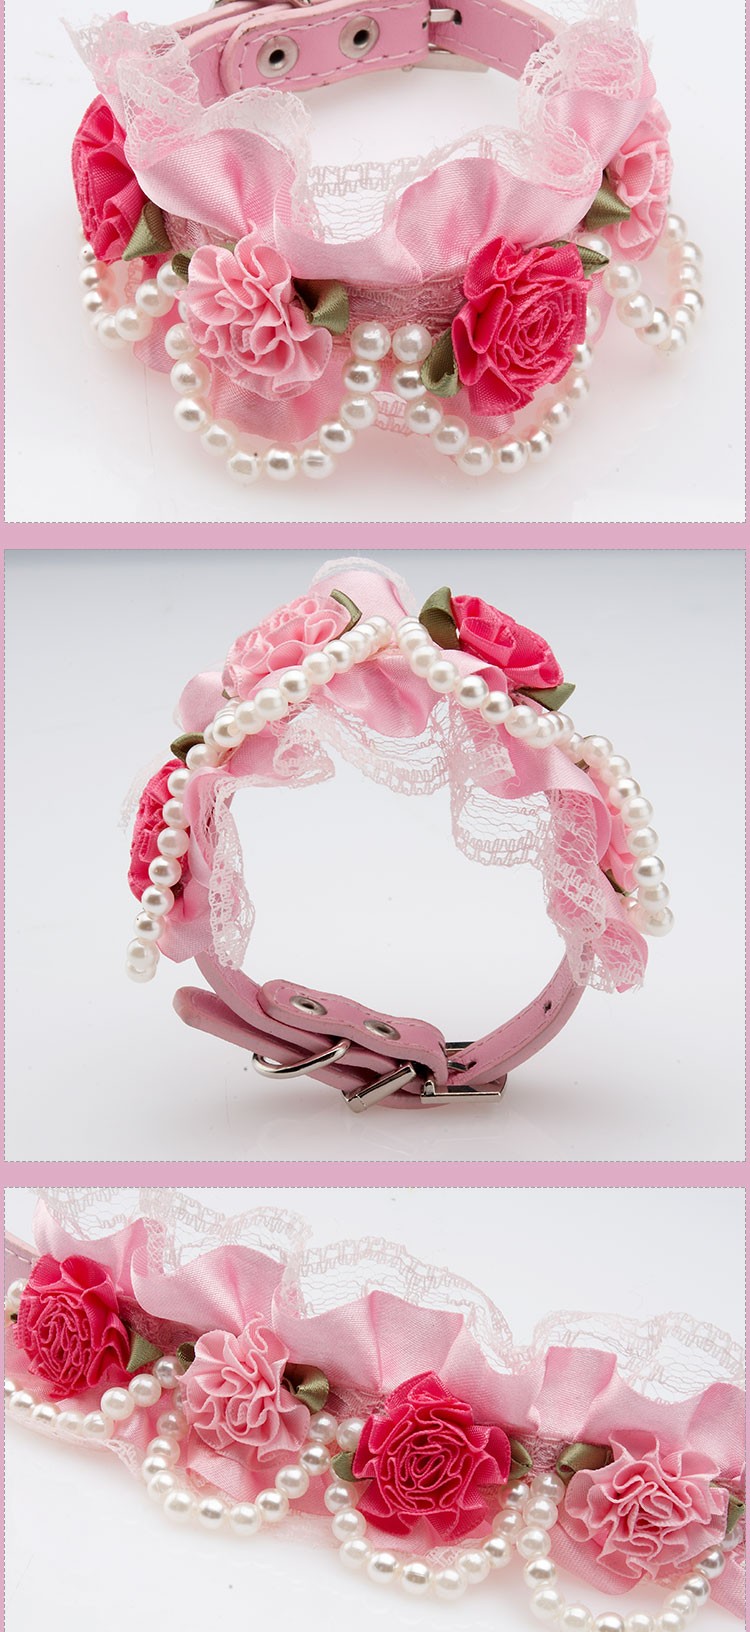 Fancy Pet Cat Collar Leather with Crystal Rhinestone Buckle Design Rose Lace Pearl